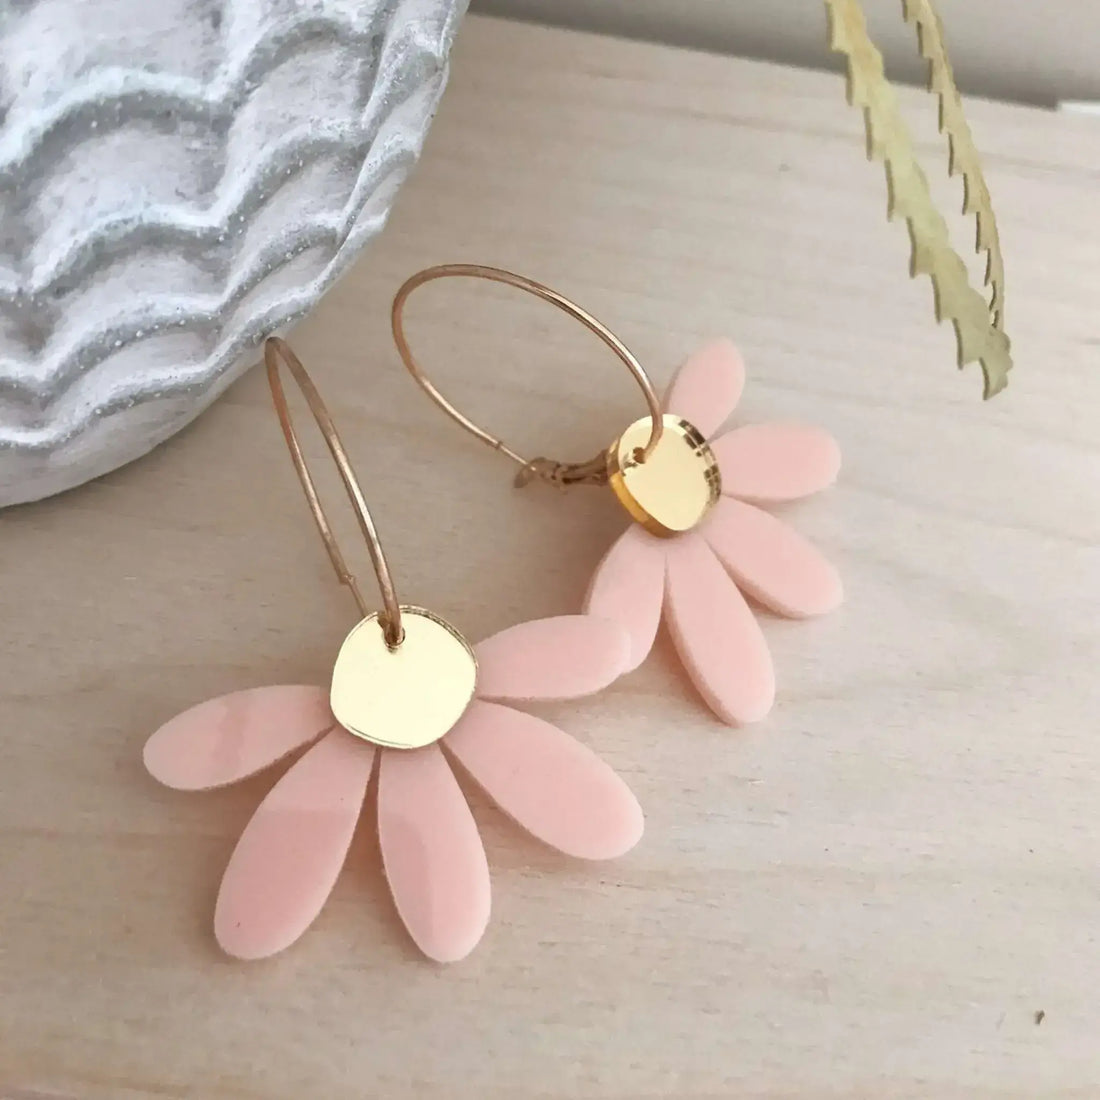 Jumbo Daisy Hoop Earrings in Pale Pink &amp; Gold by Foxie Collective